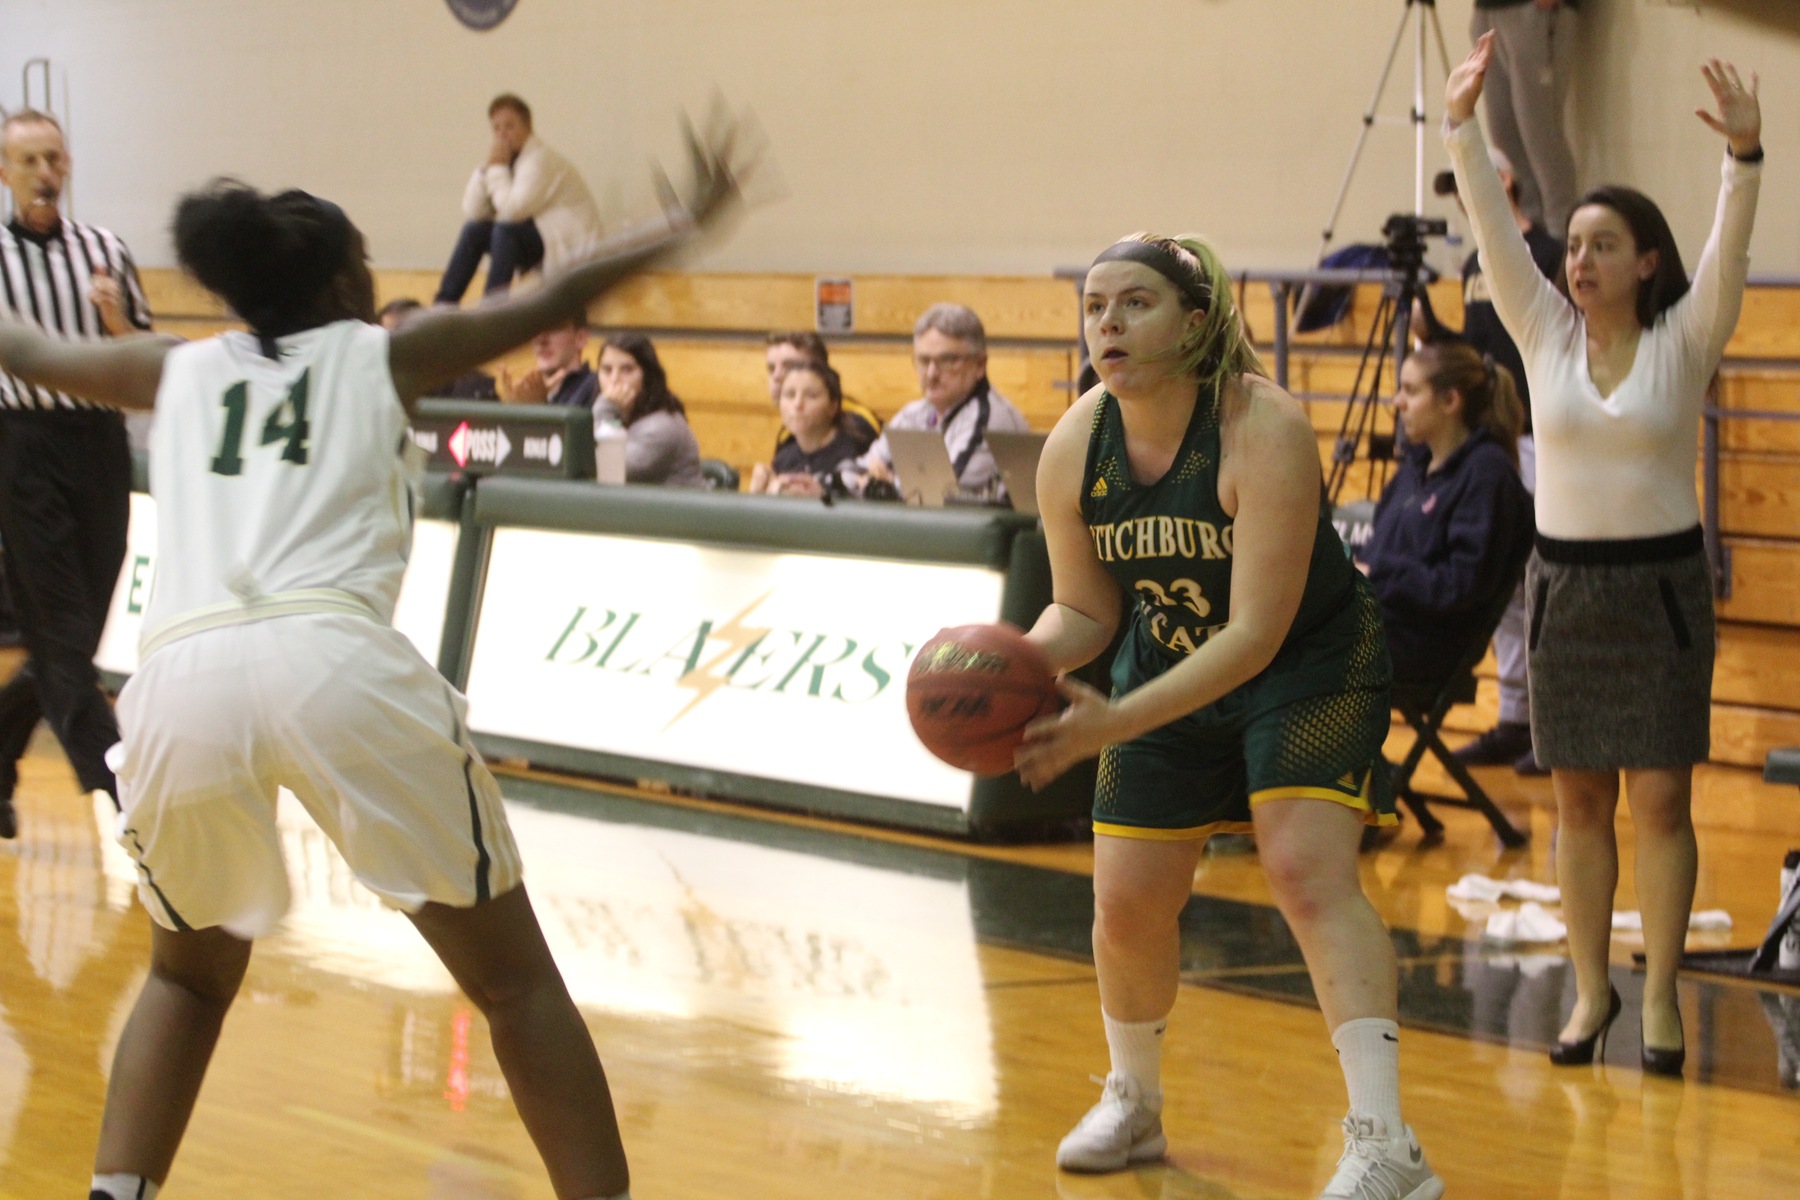 Falcons Clipped By Mustangs, 94-80